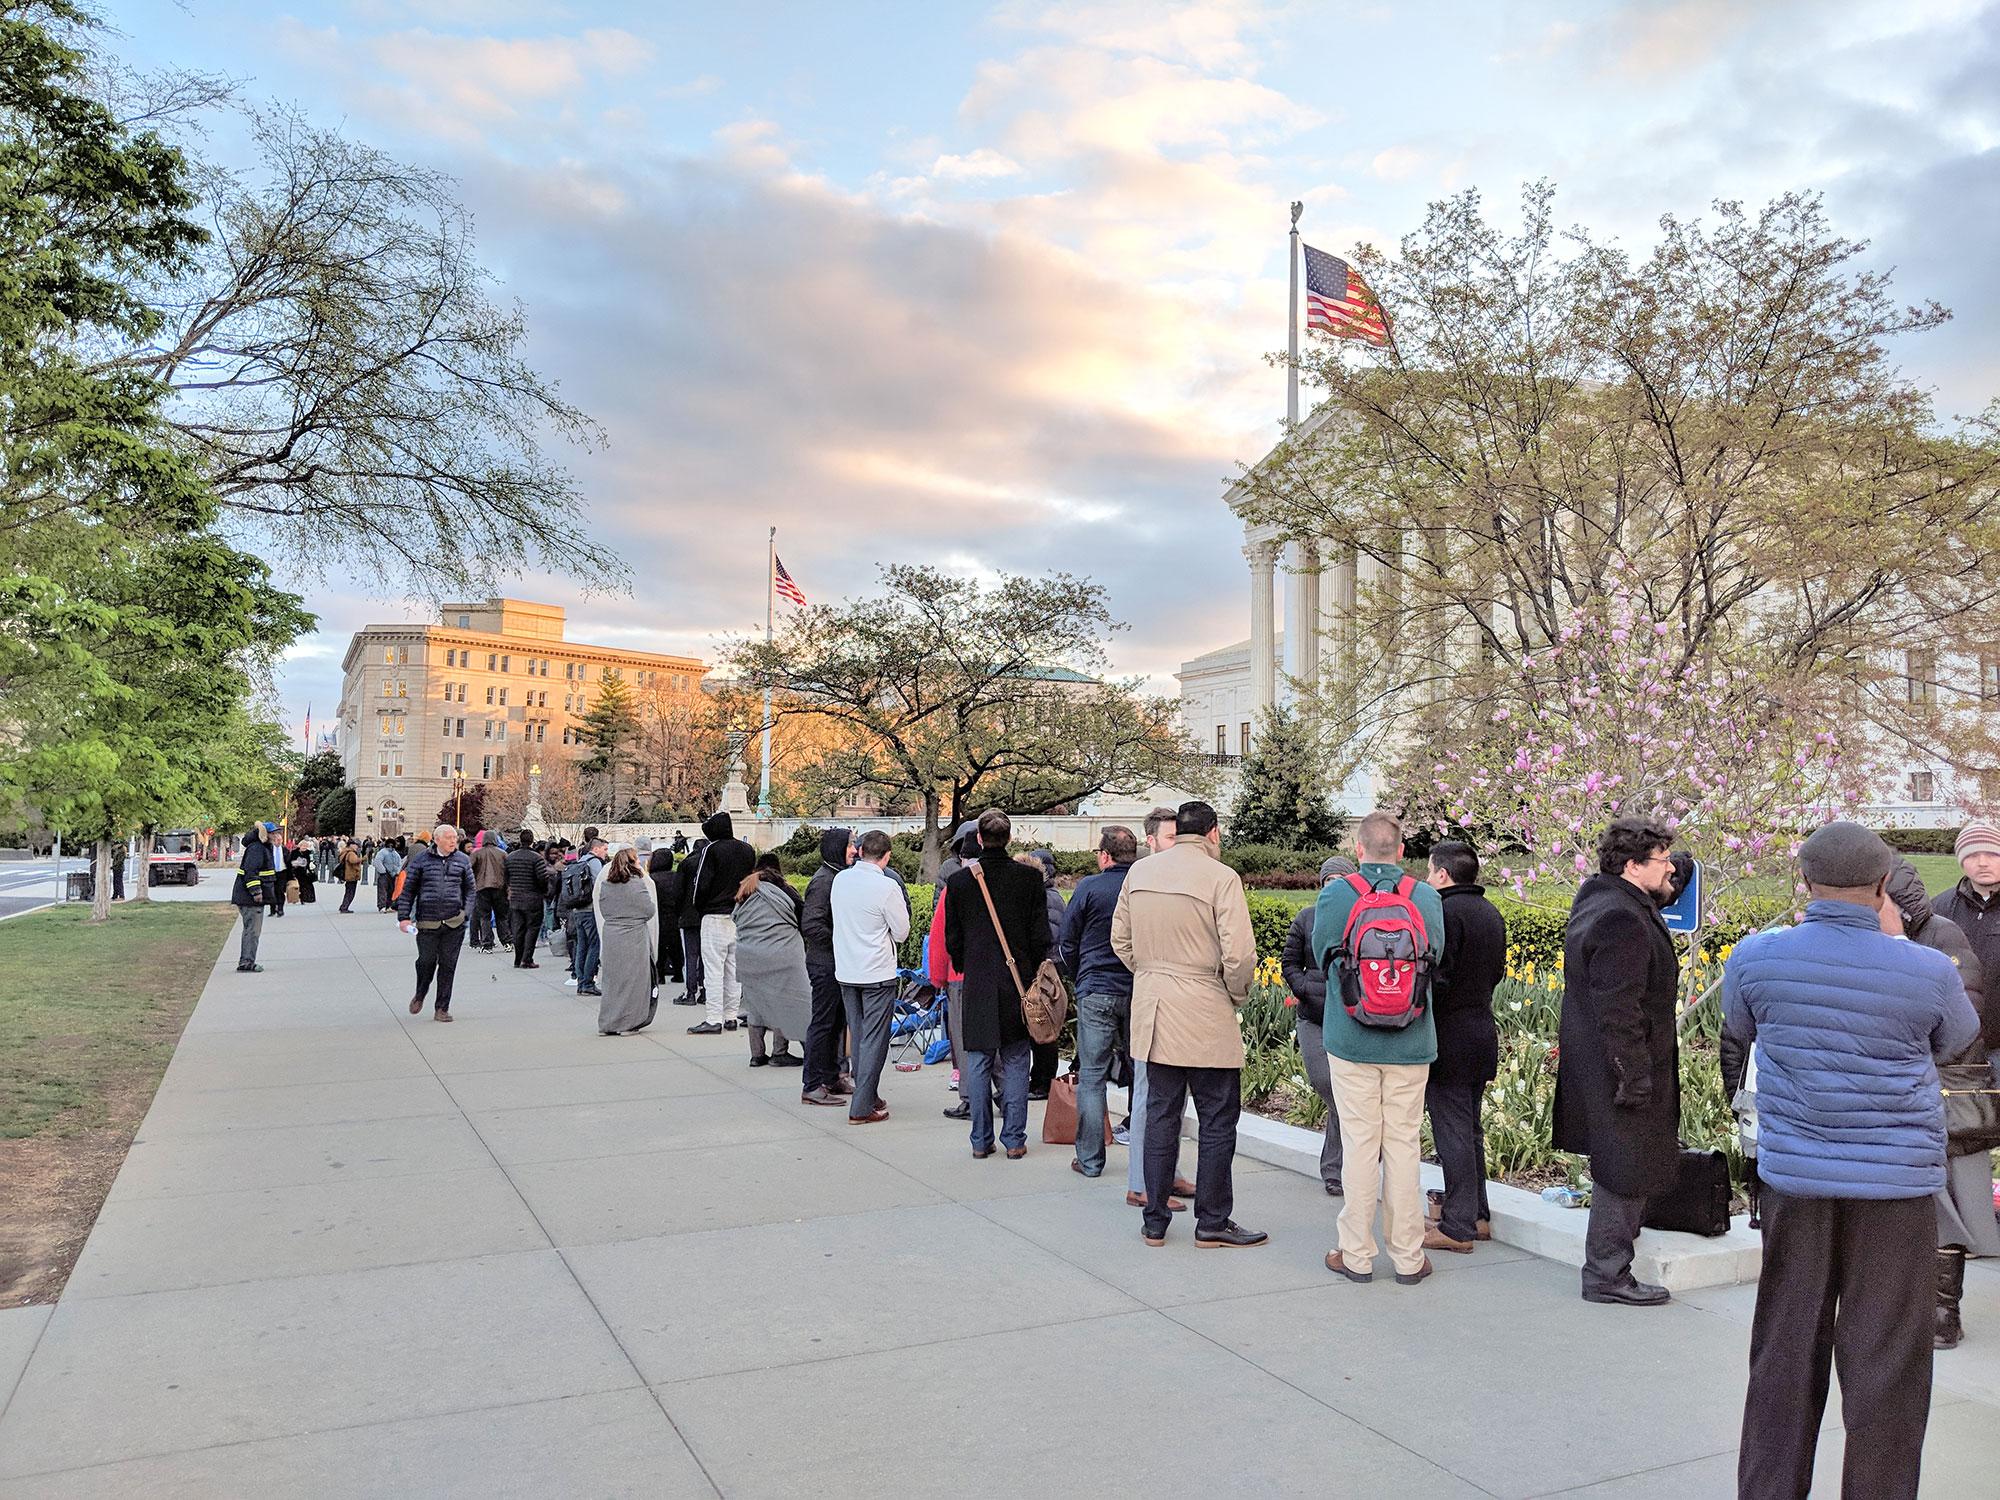 A line of lawyers and tourists in front of the Supreme Court.